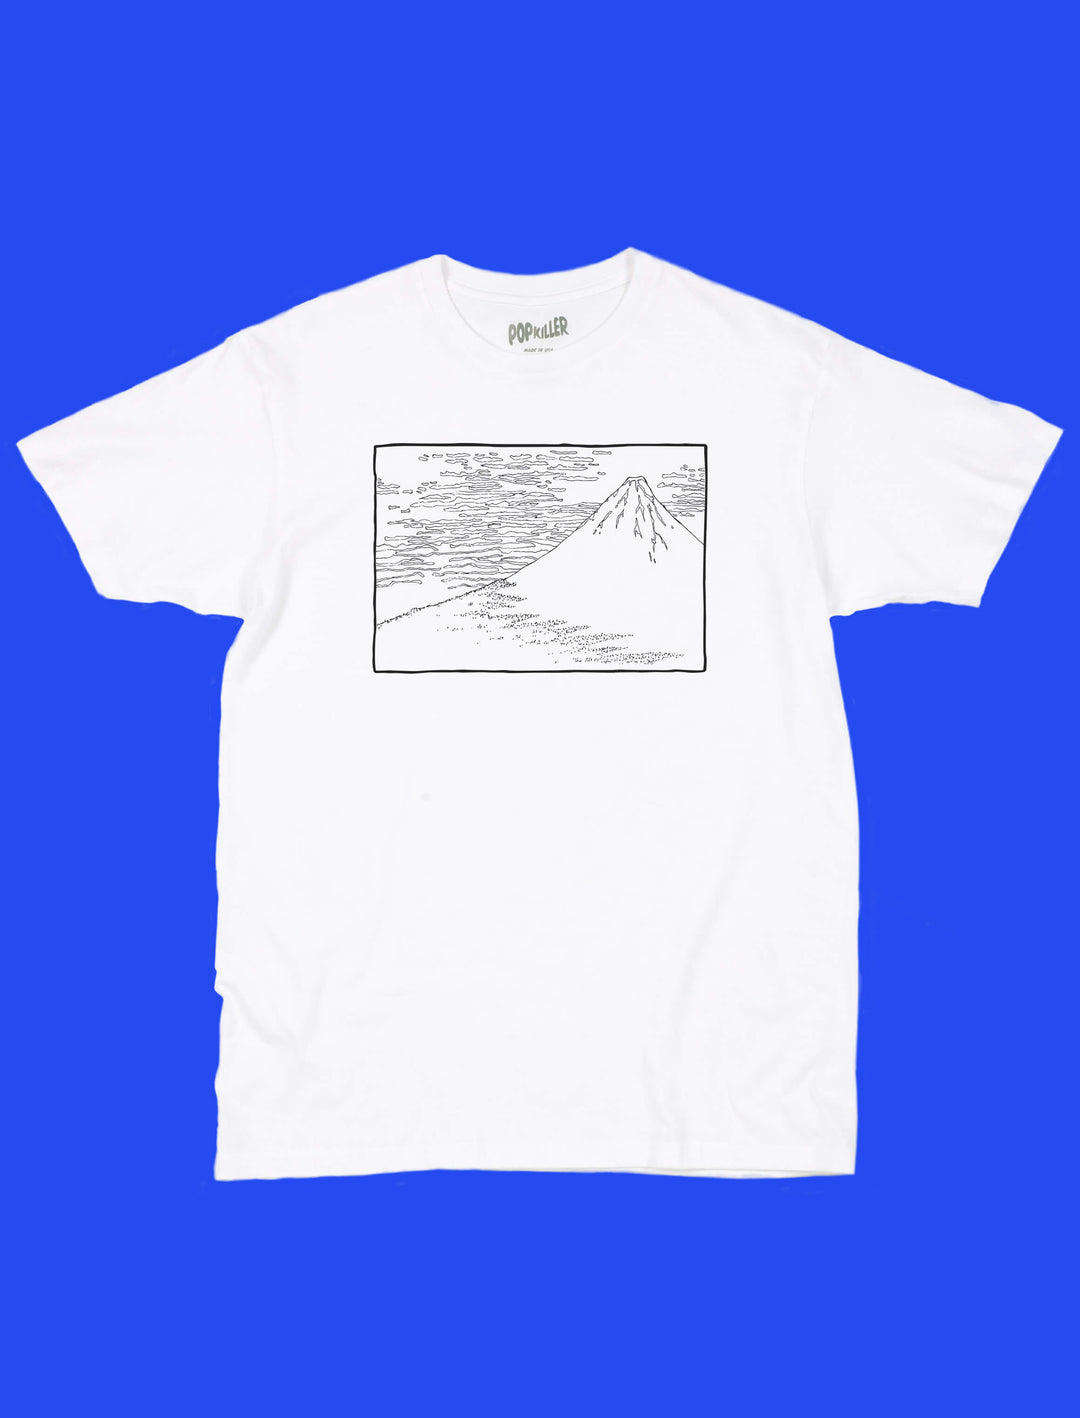 Line drawing of Mt. Fuji on a graphic tee.